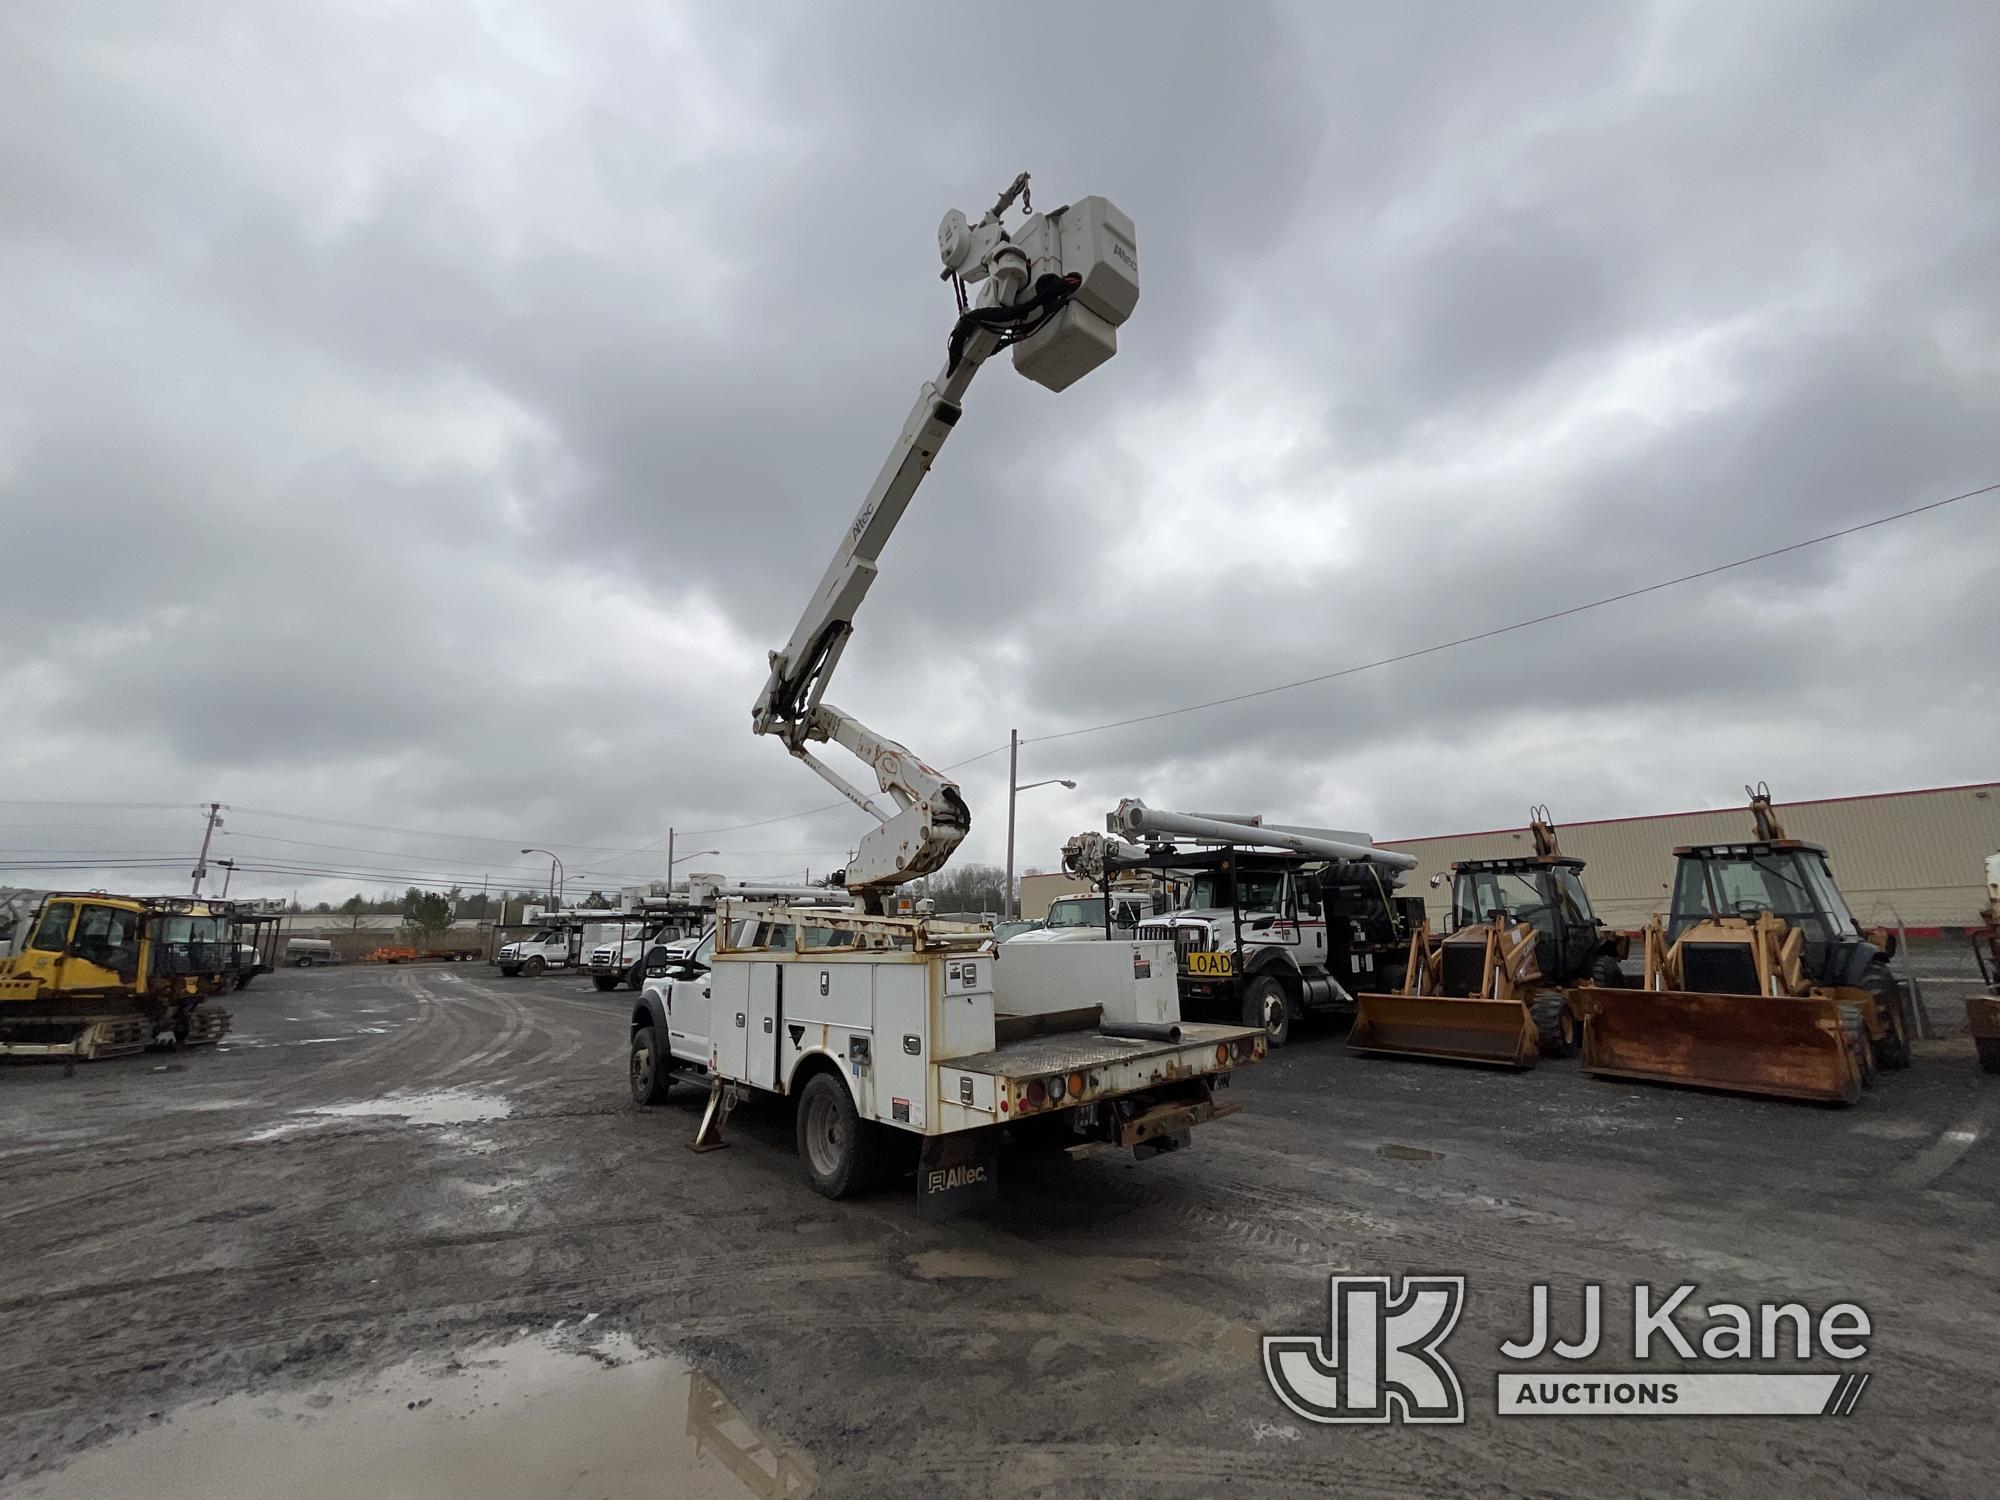 (Rome, NY) Altec AT41M, Articulating & Telescopic Material Handling Bucket Truck mounted behind cab